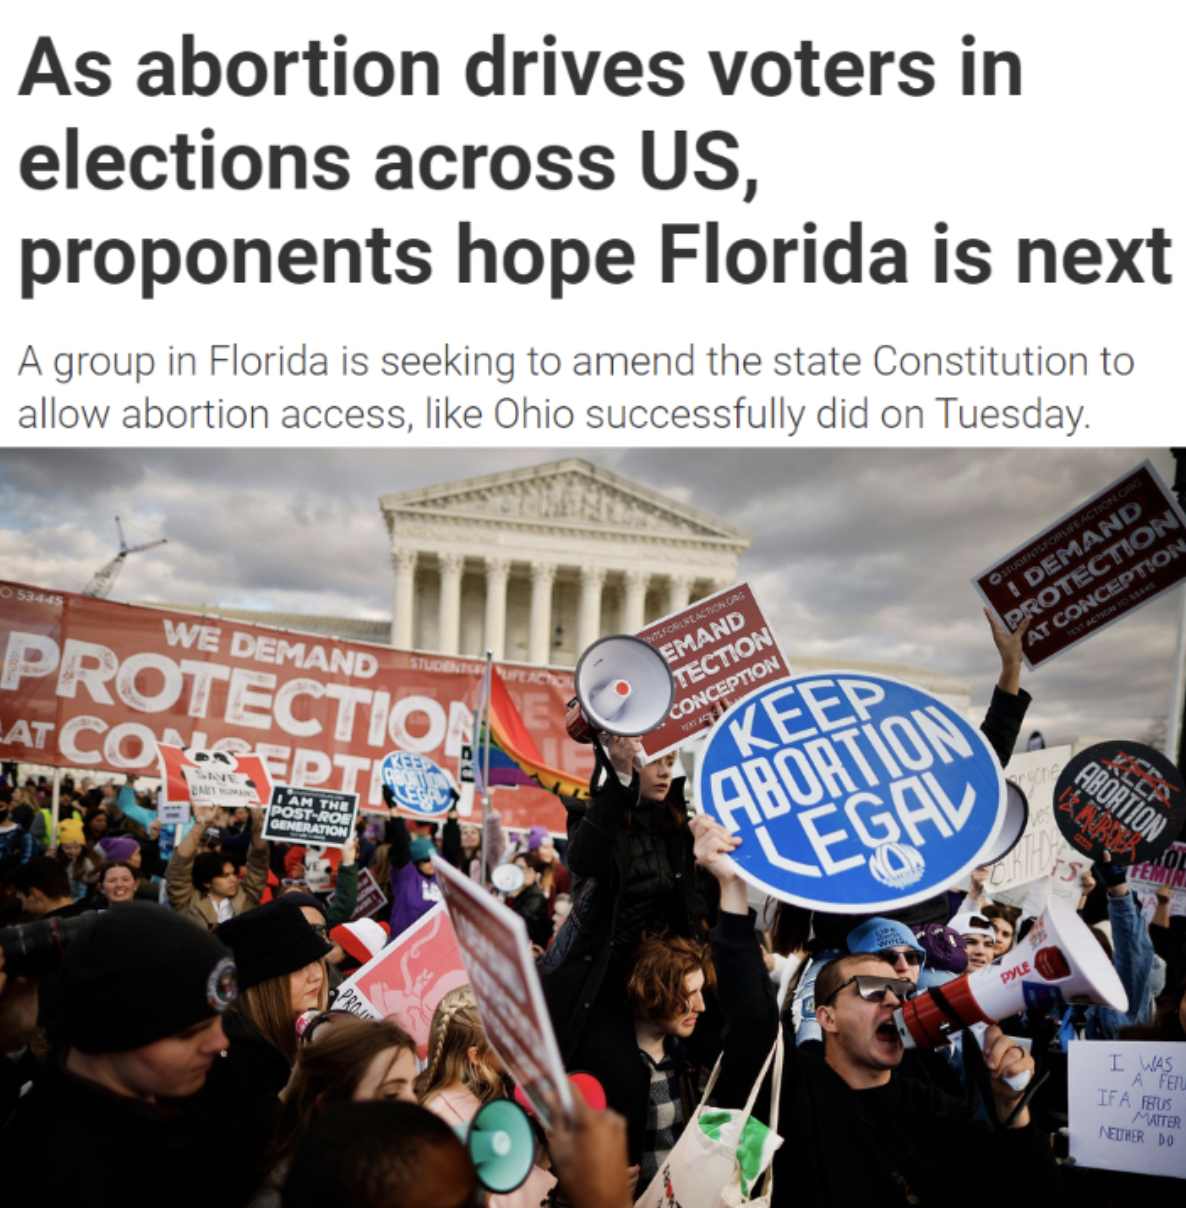 Florida Will NOT Be Next